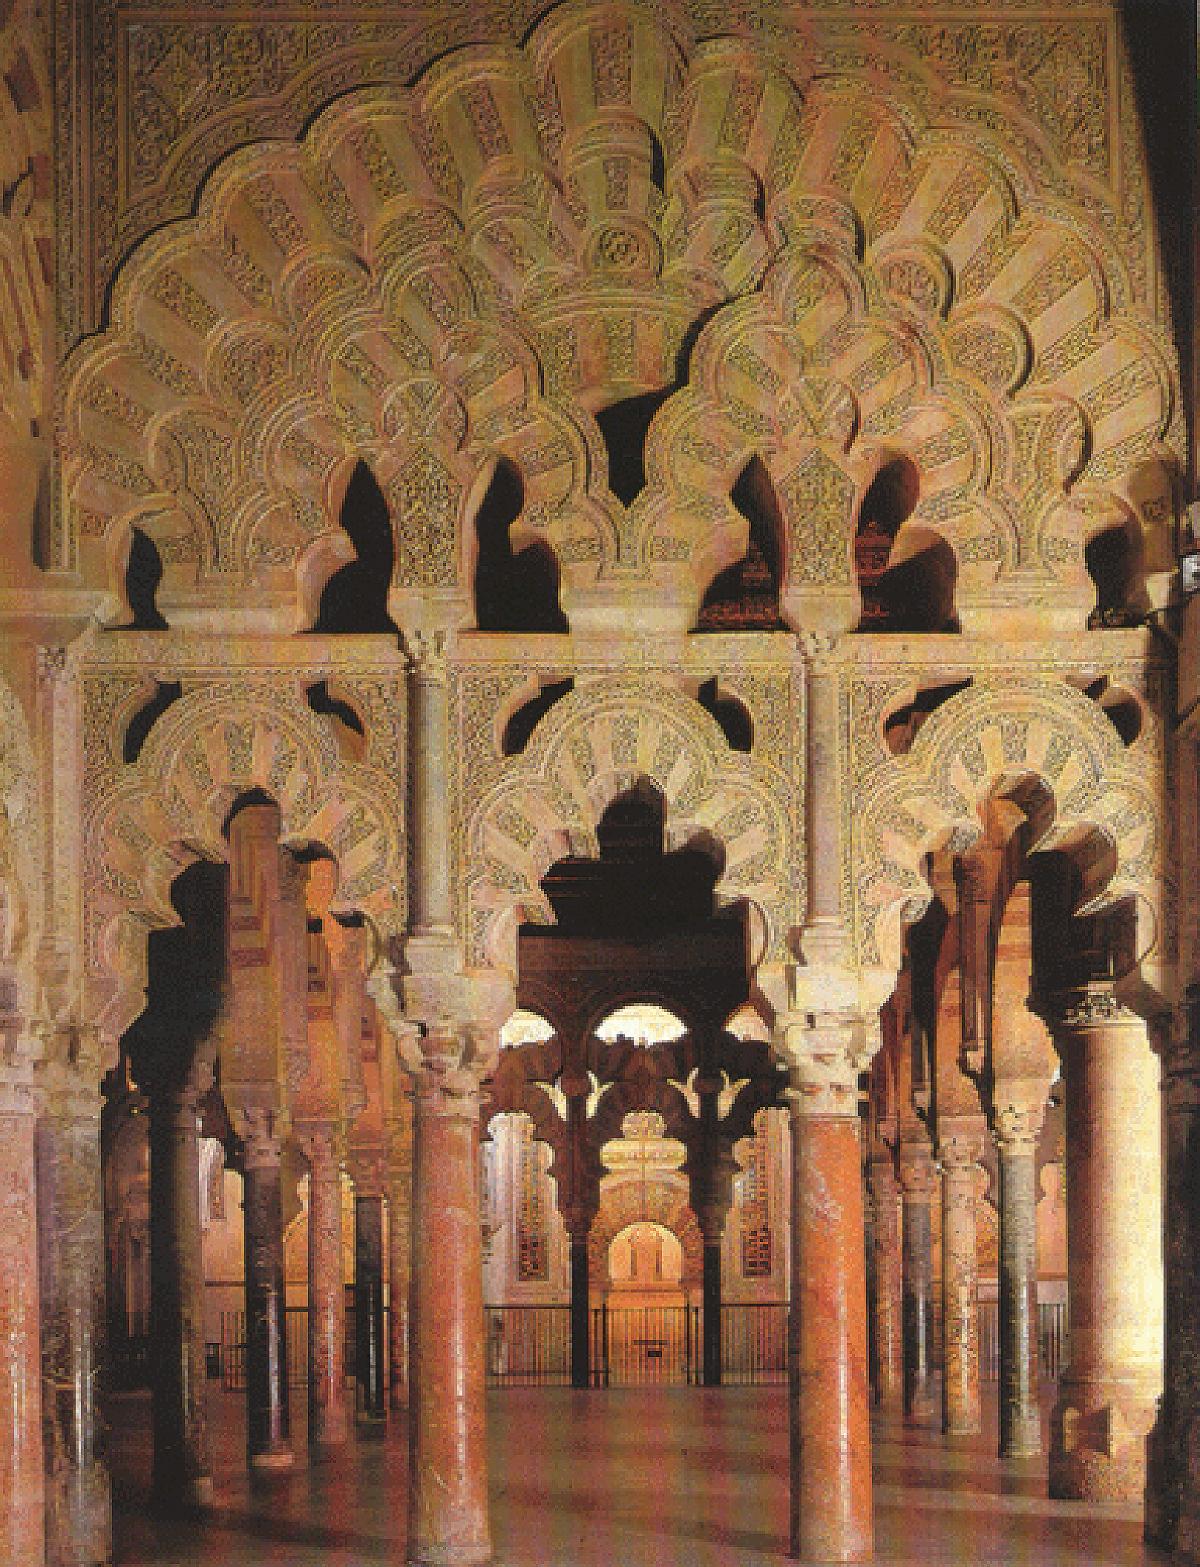 Scalloped arches in gold, with red marble columns